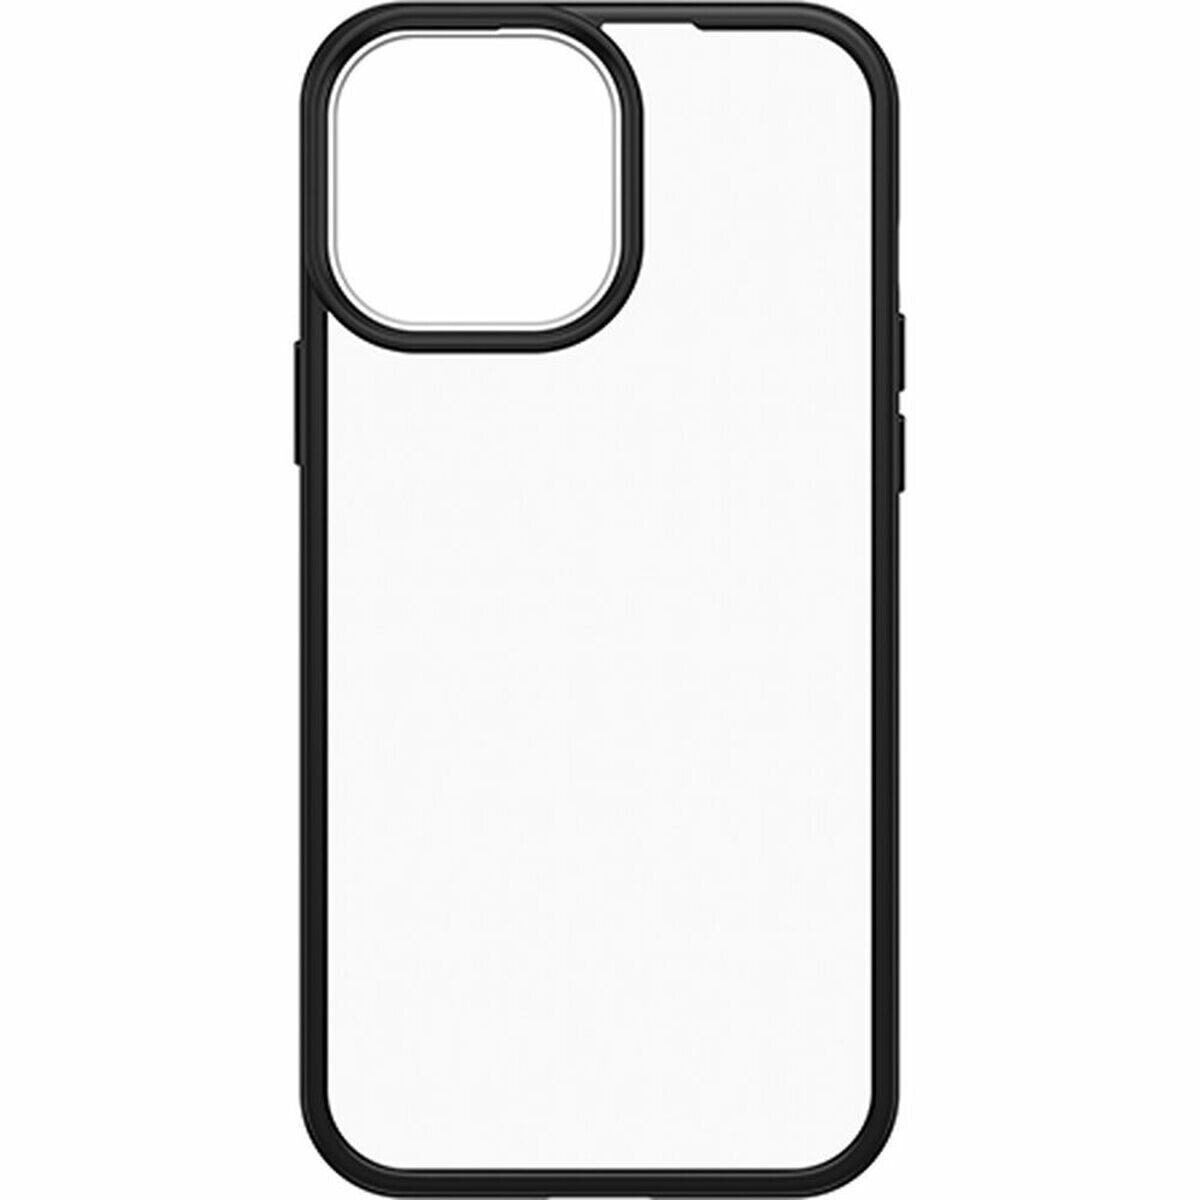 Mobile cover iPhone 13/12 Pro Max Otterbox 77-85597